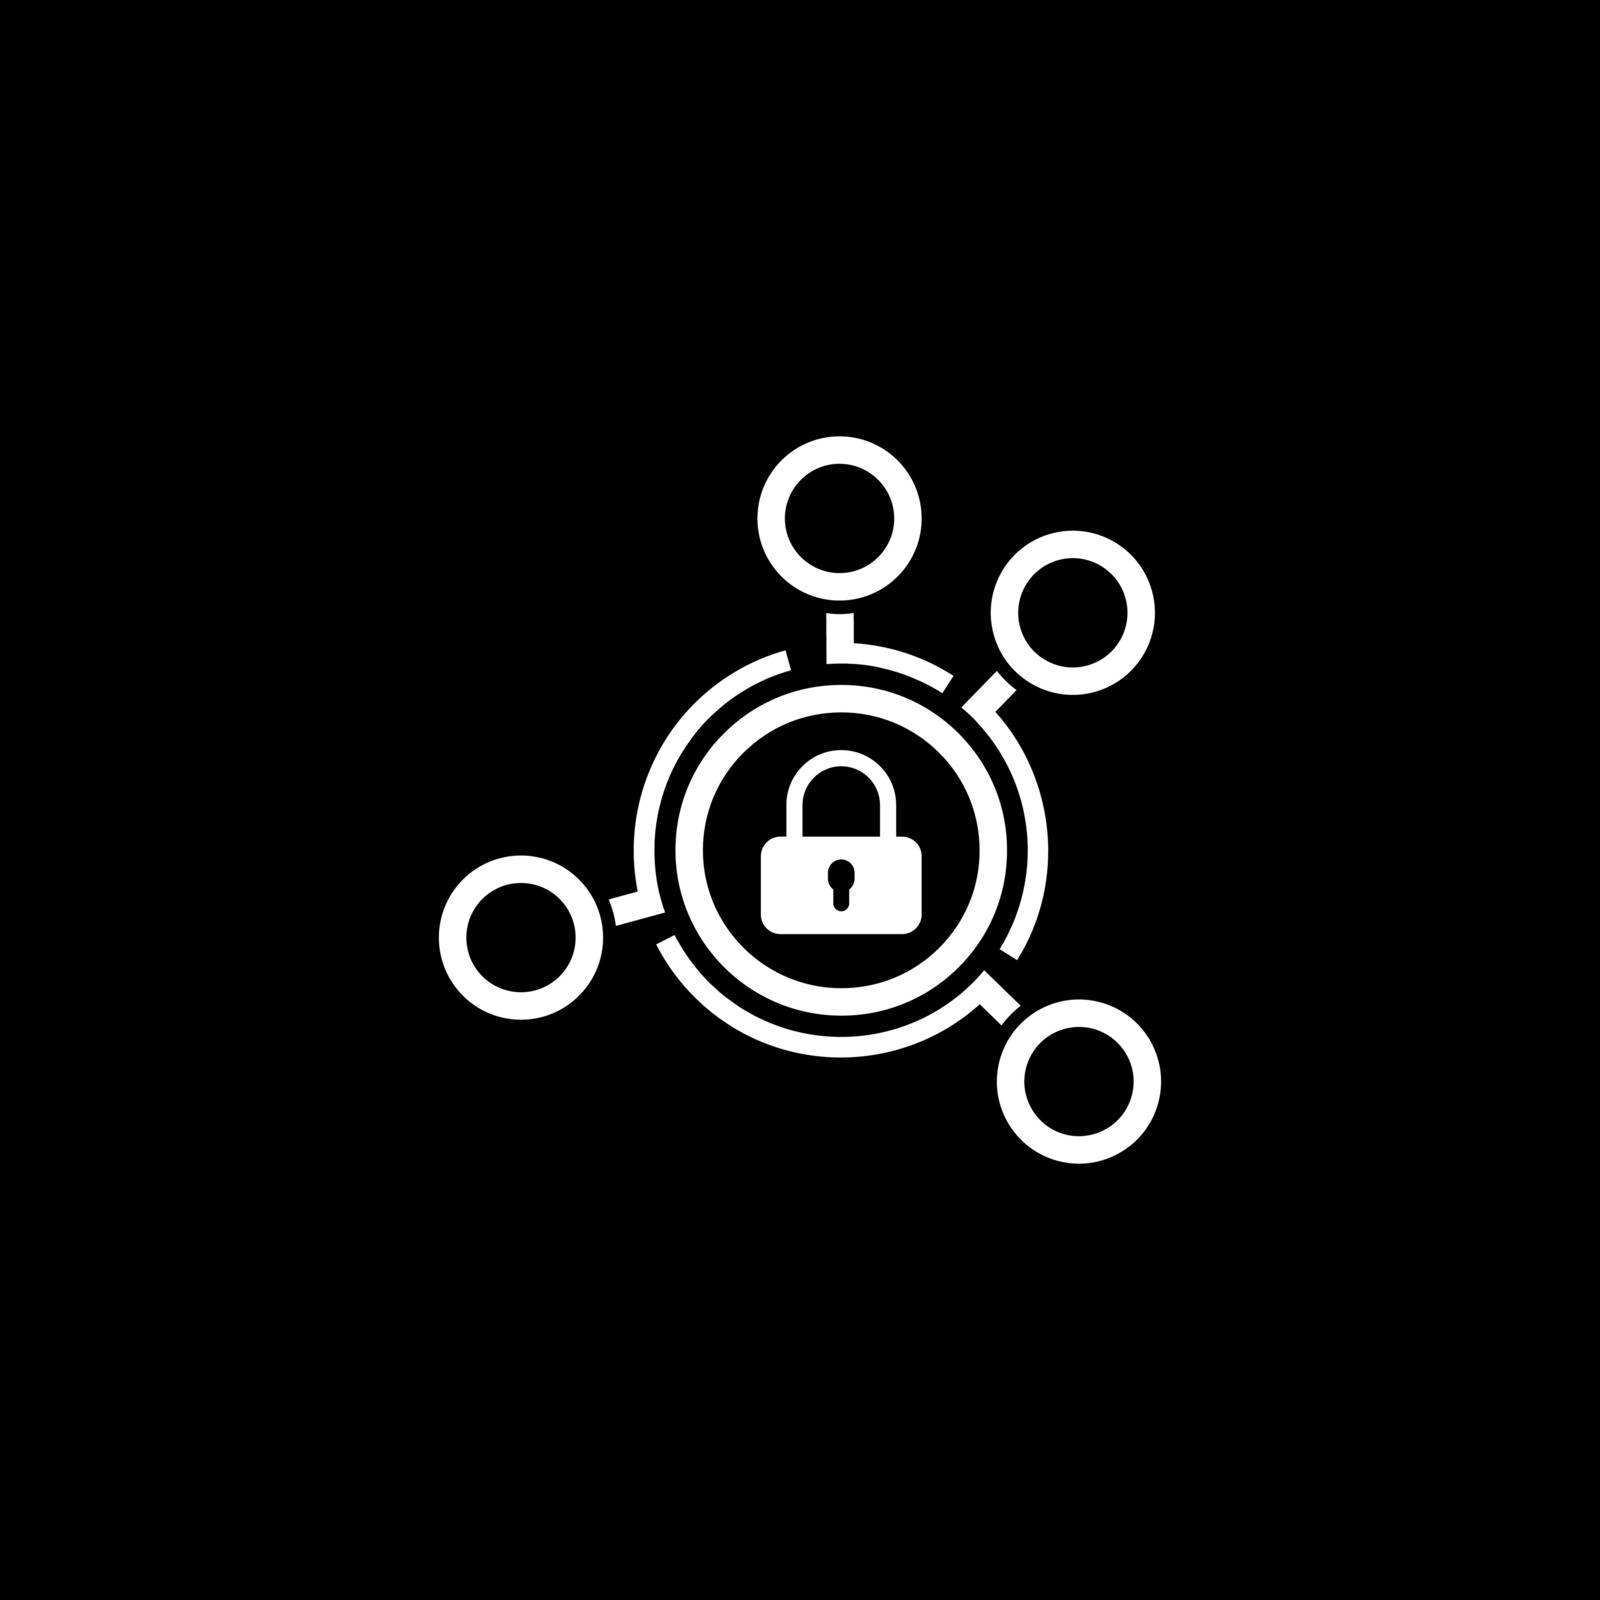 Advanced Security Solutions Icon. Flat Design. Business Concept. Isolated Illustration.